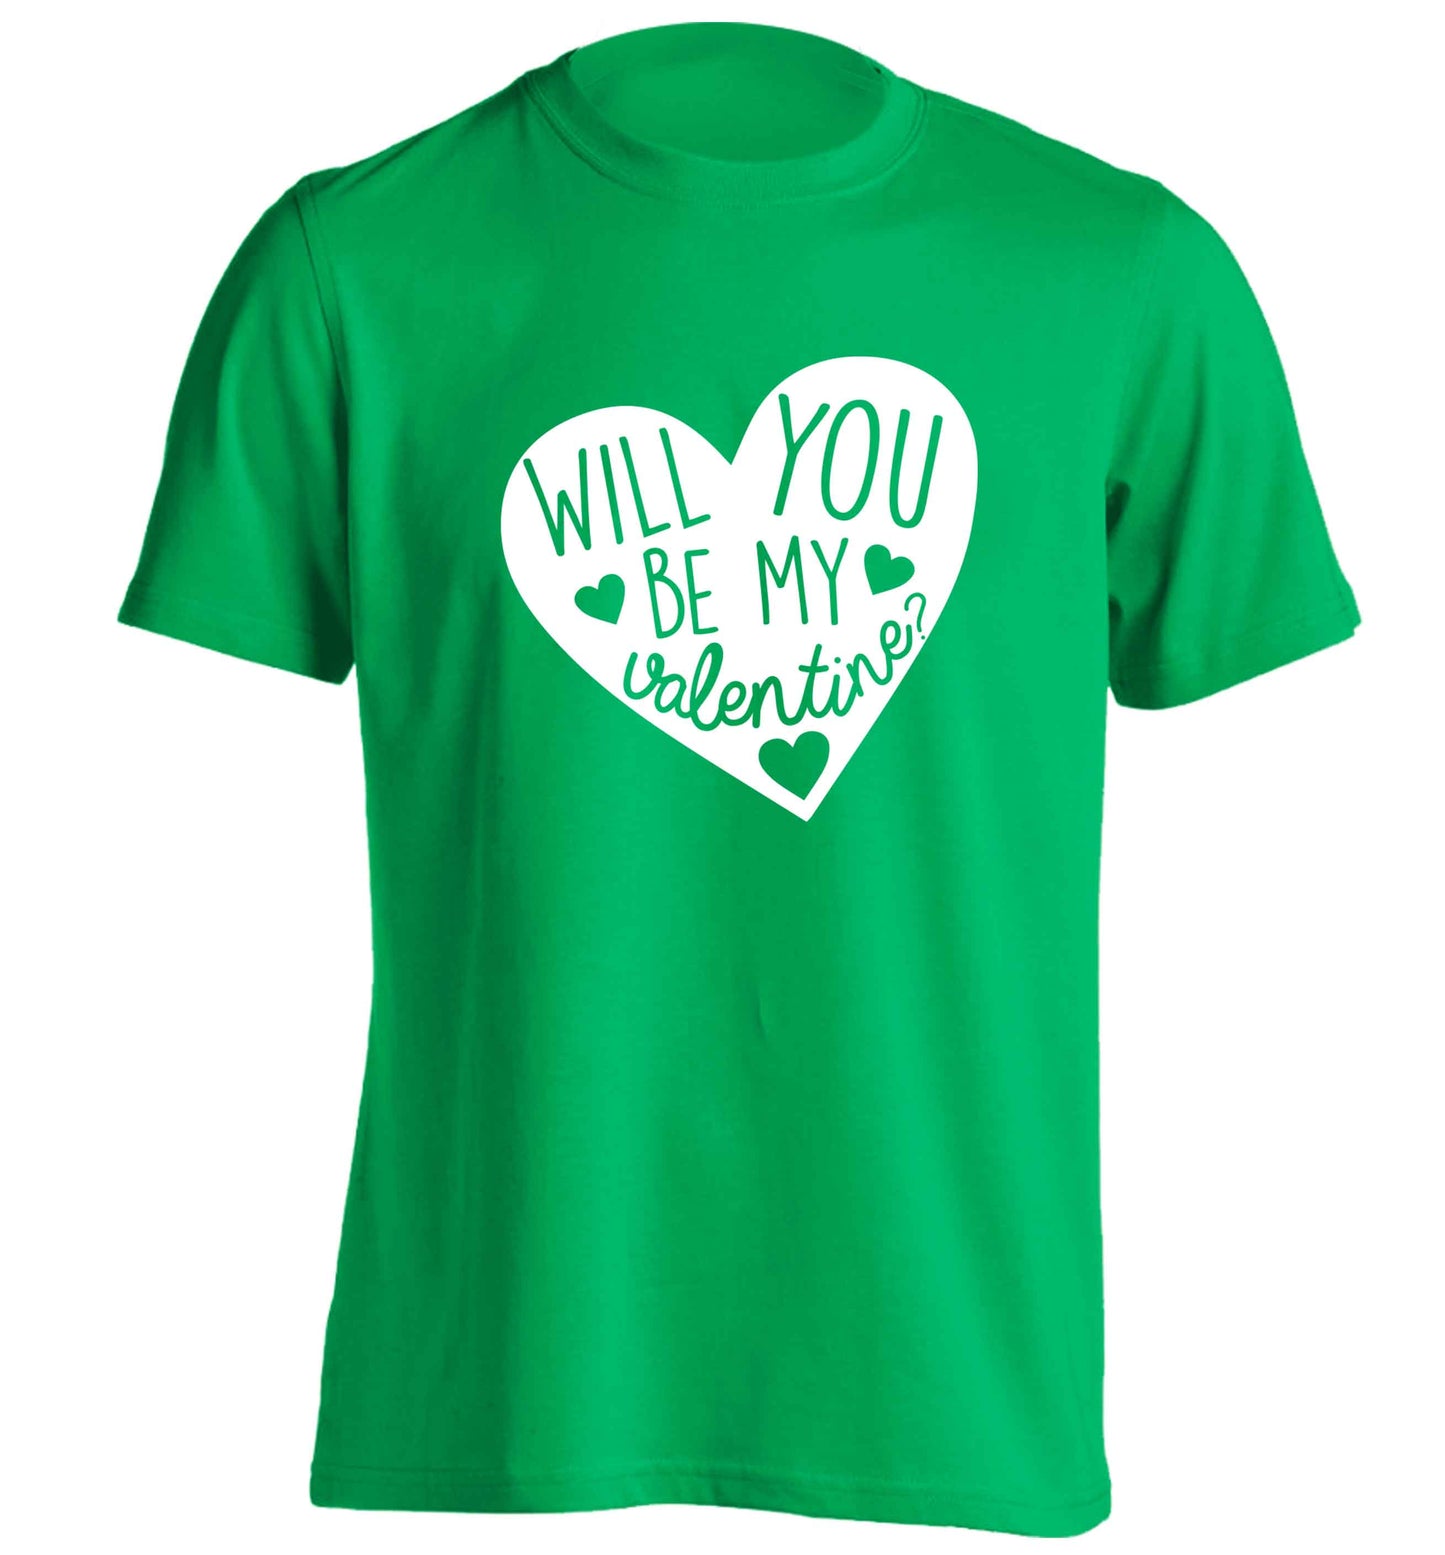 Will you be my valentine? adults unisex green Tshirt 2XL